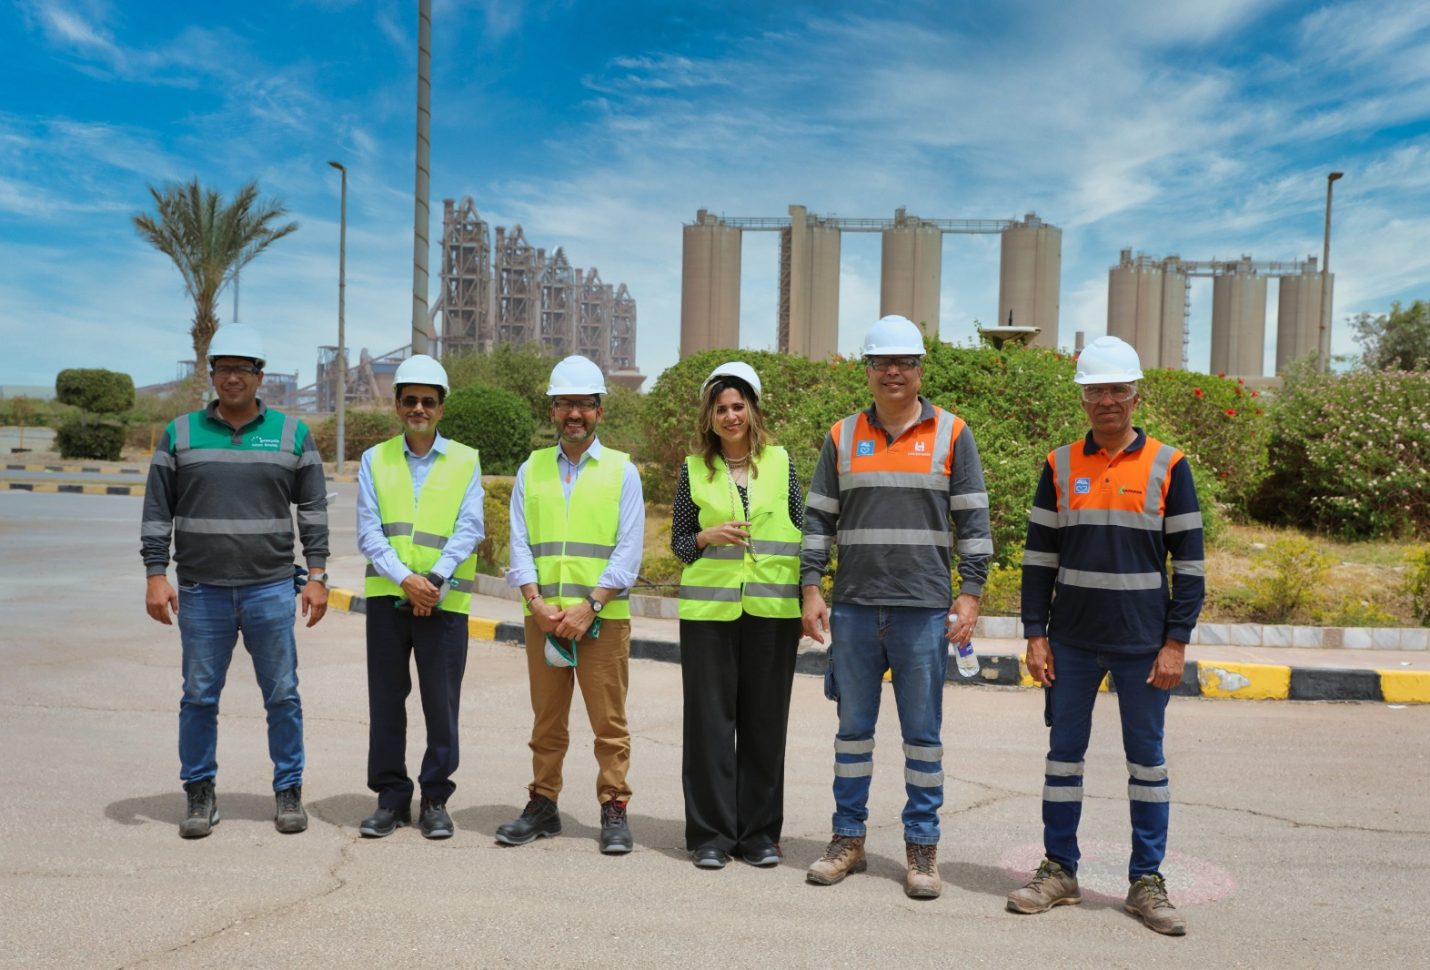 SGE Switzerland team’s visit to Lafarge Egypt reflects interest in country’s green investments